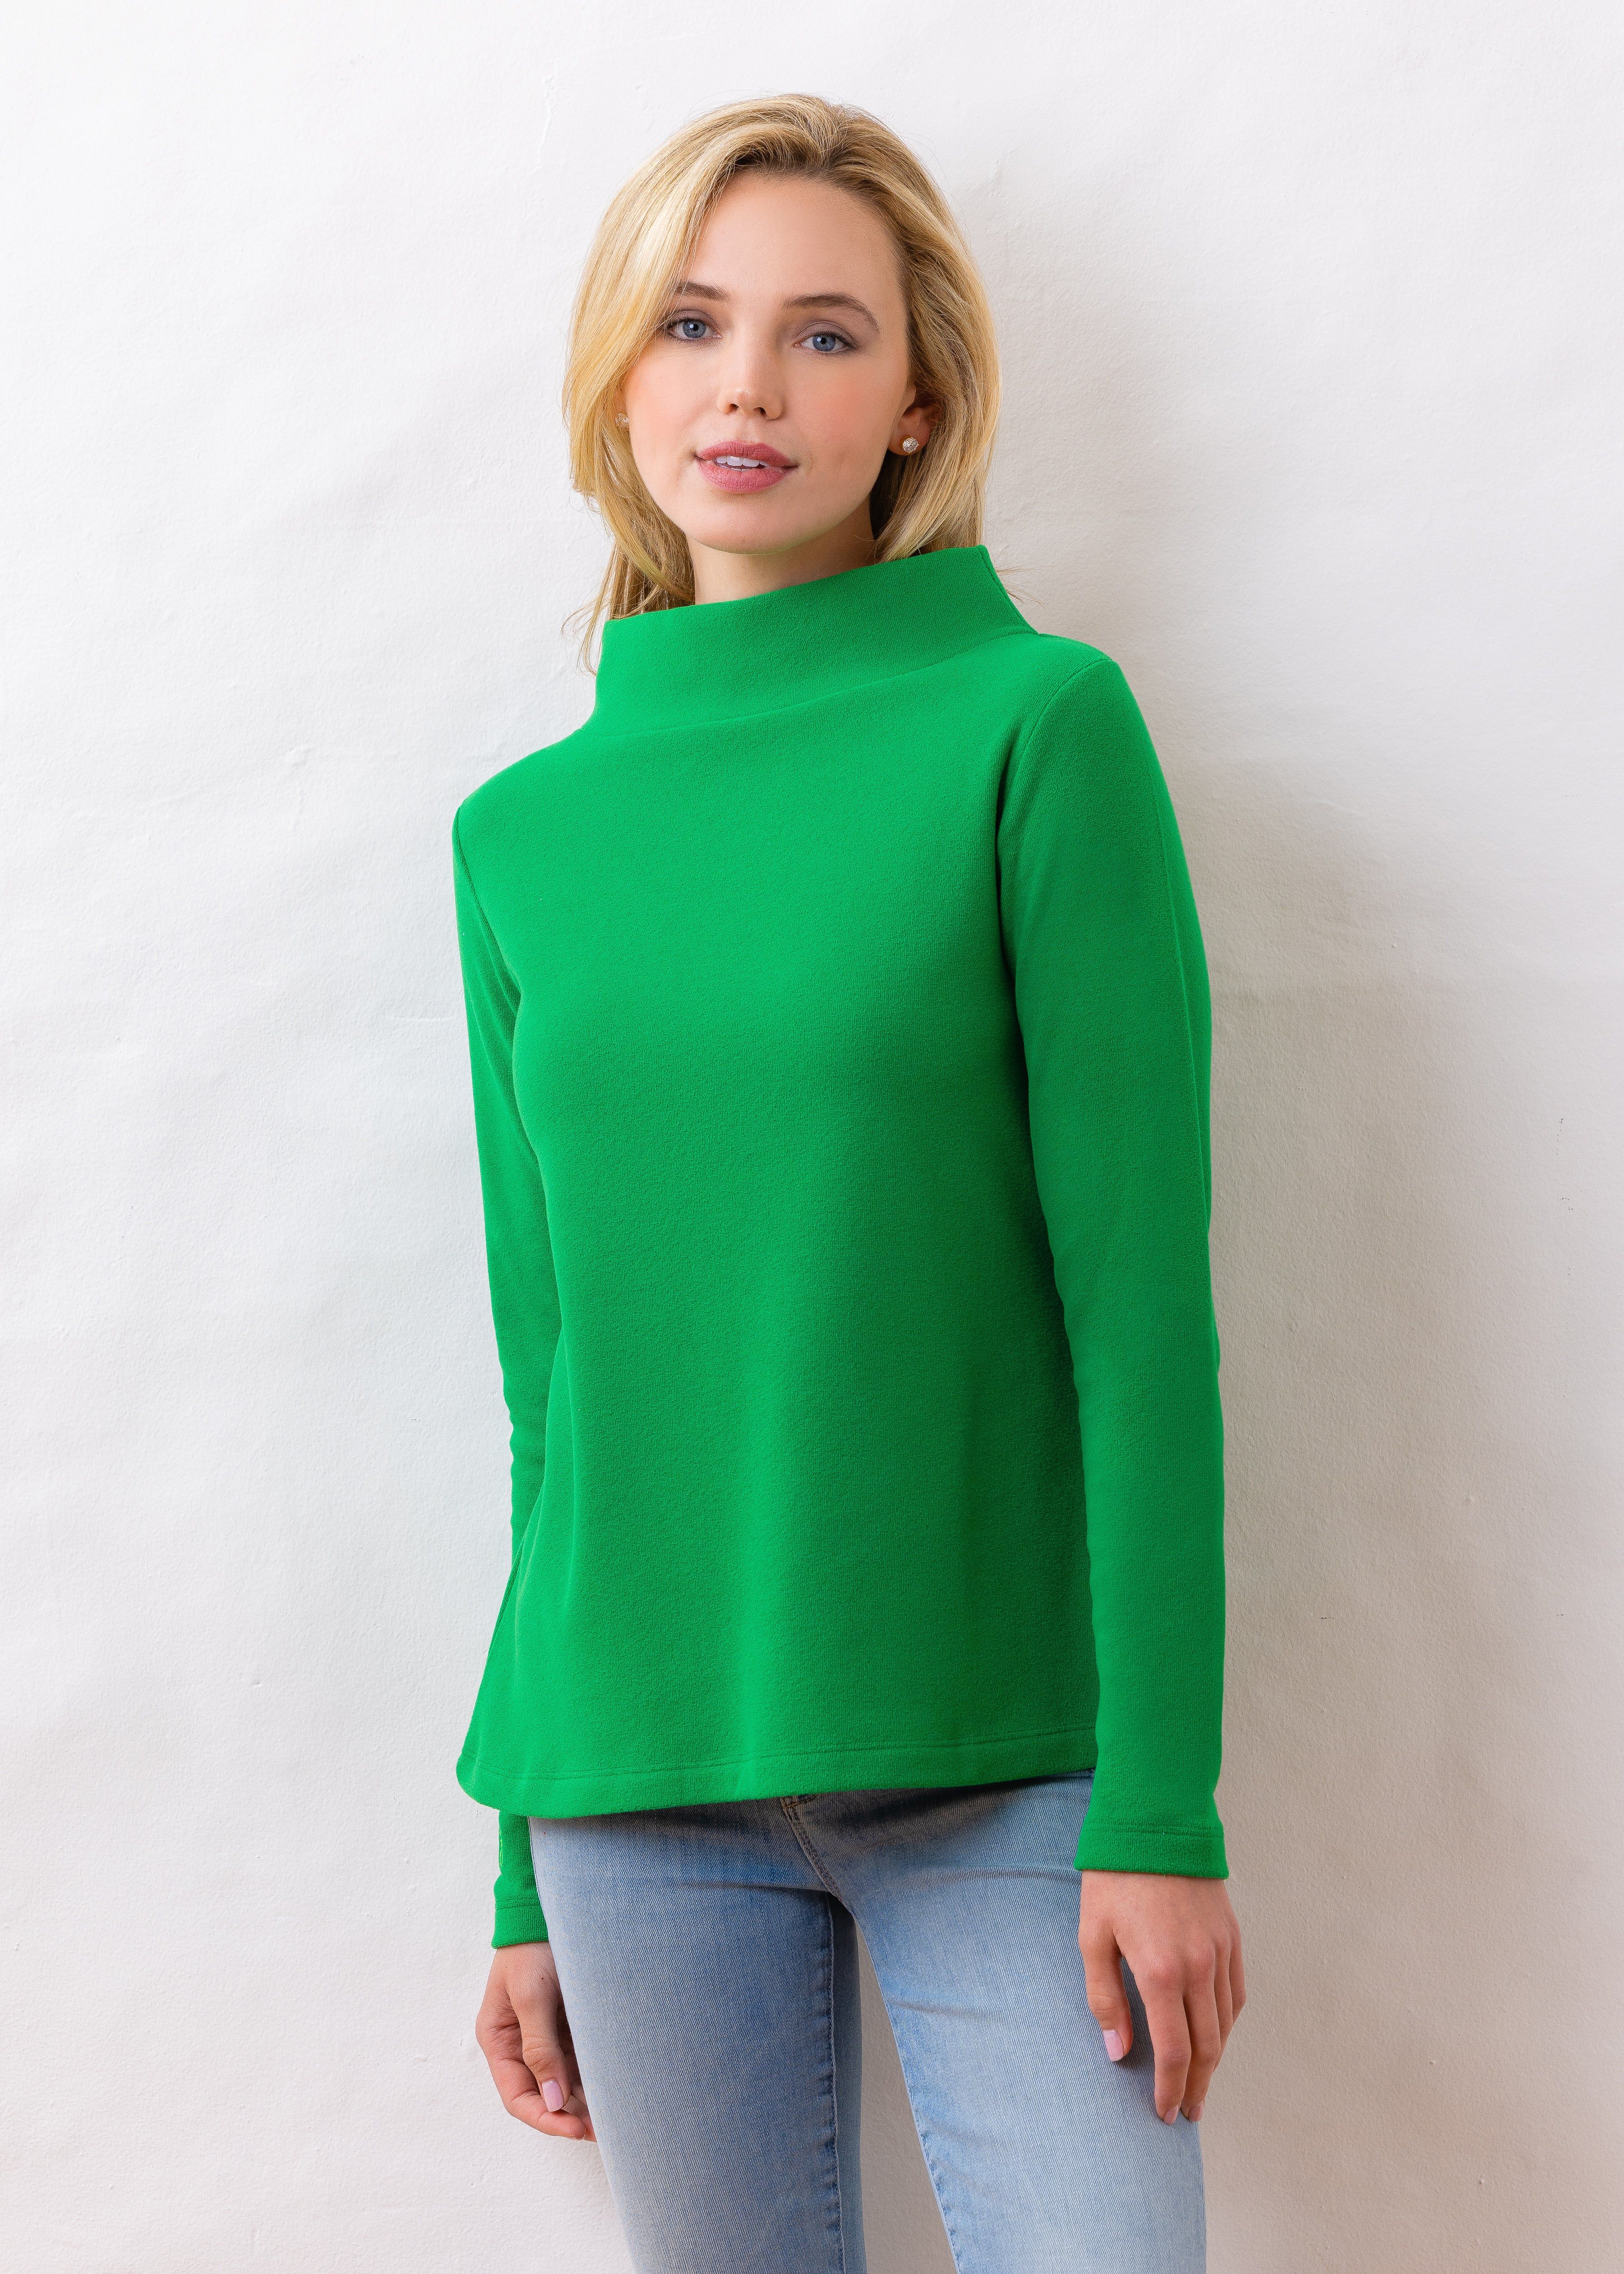 Greenpoint Boatneck in Terry Fleece (Kelly Green) | Dudley Stephens